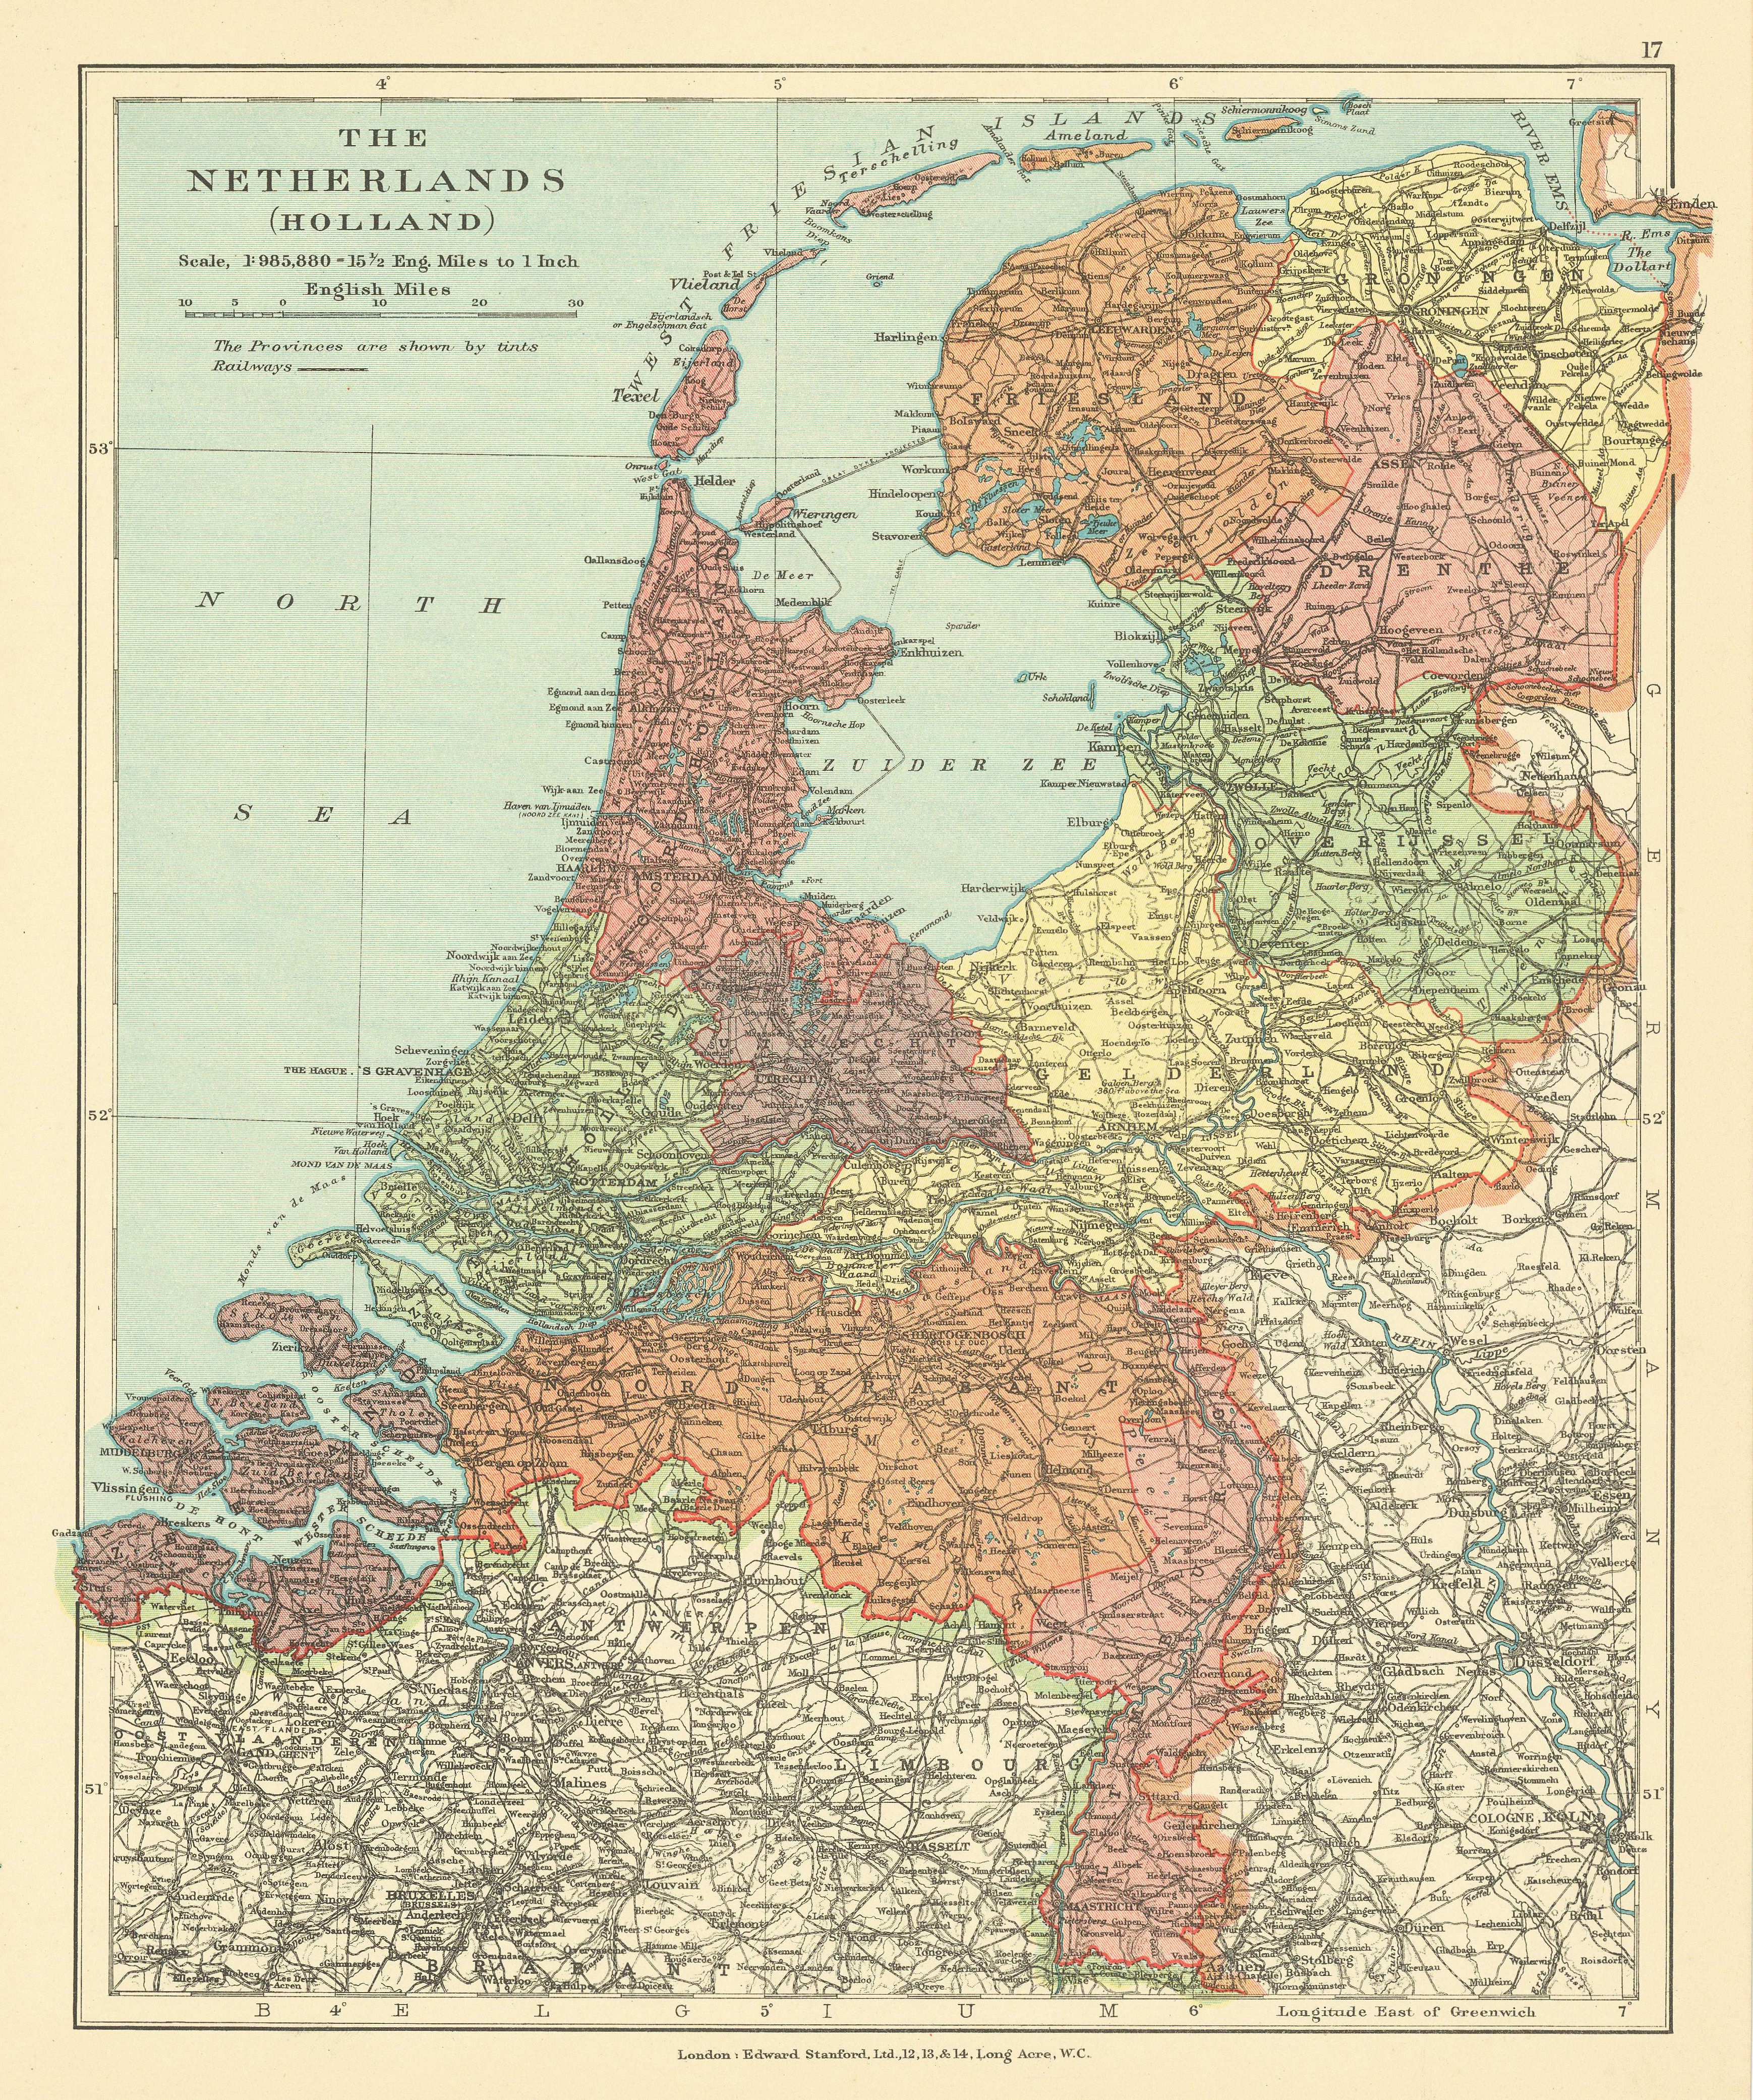 The Netherlands (Holland) in provinces / provincies. STANFORD c1925 old map